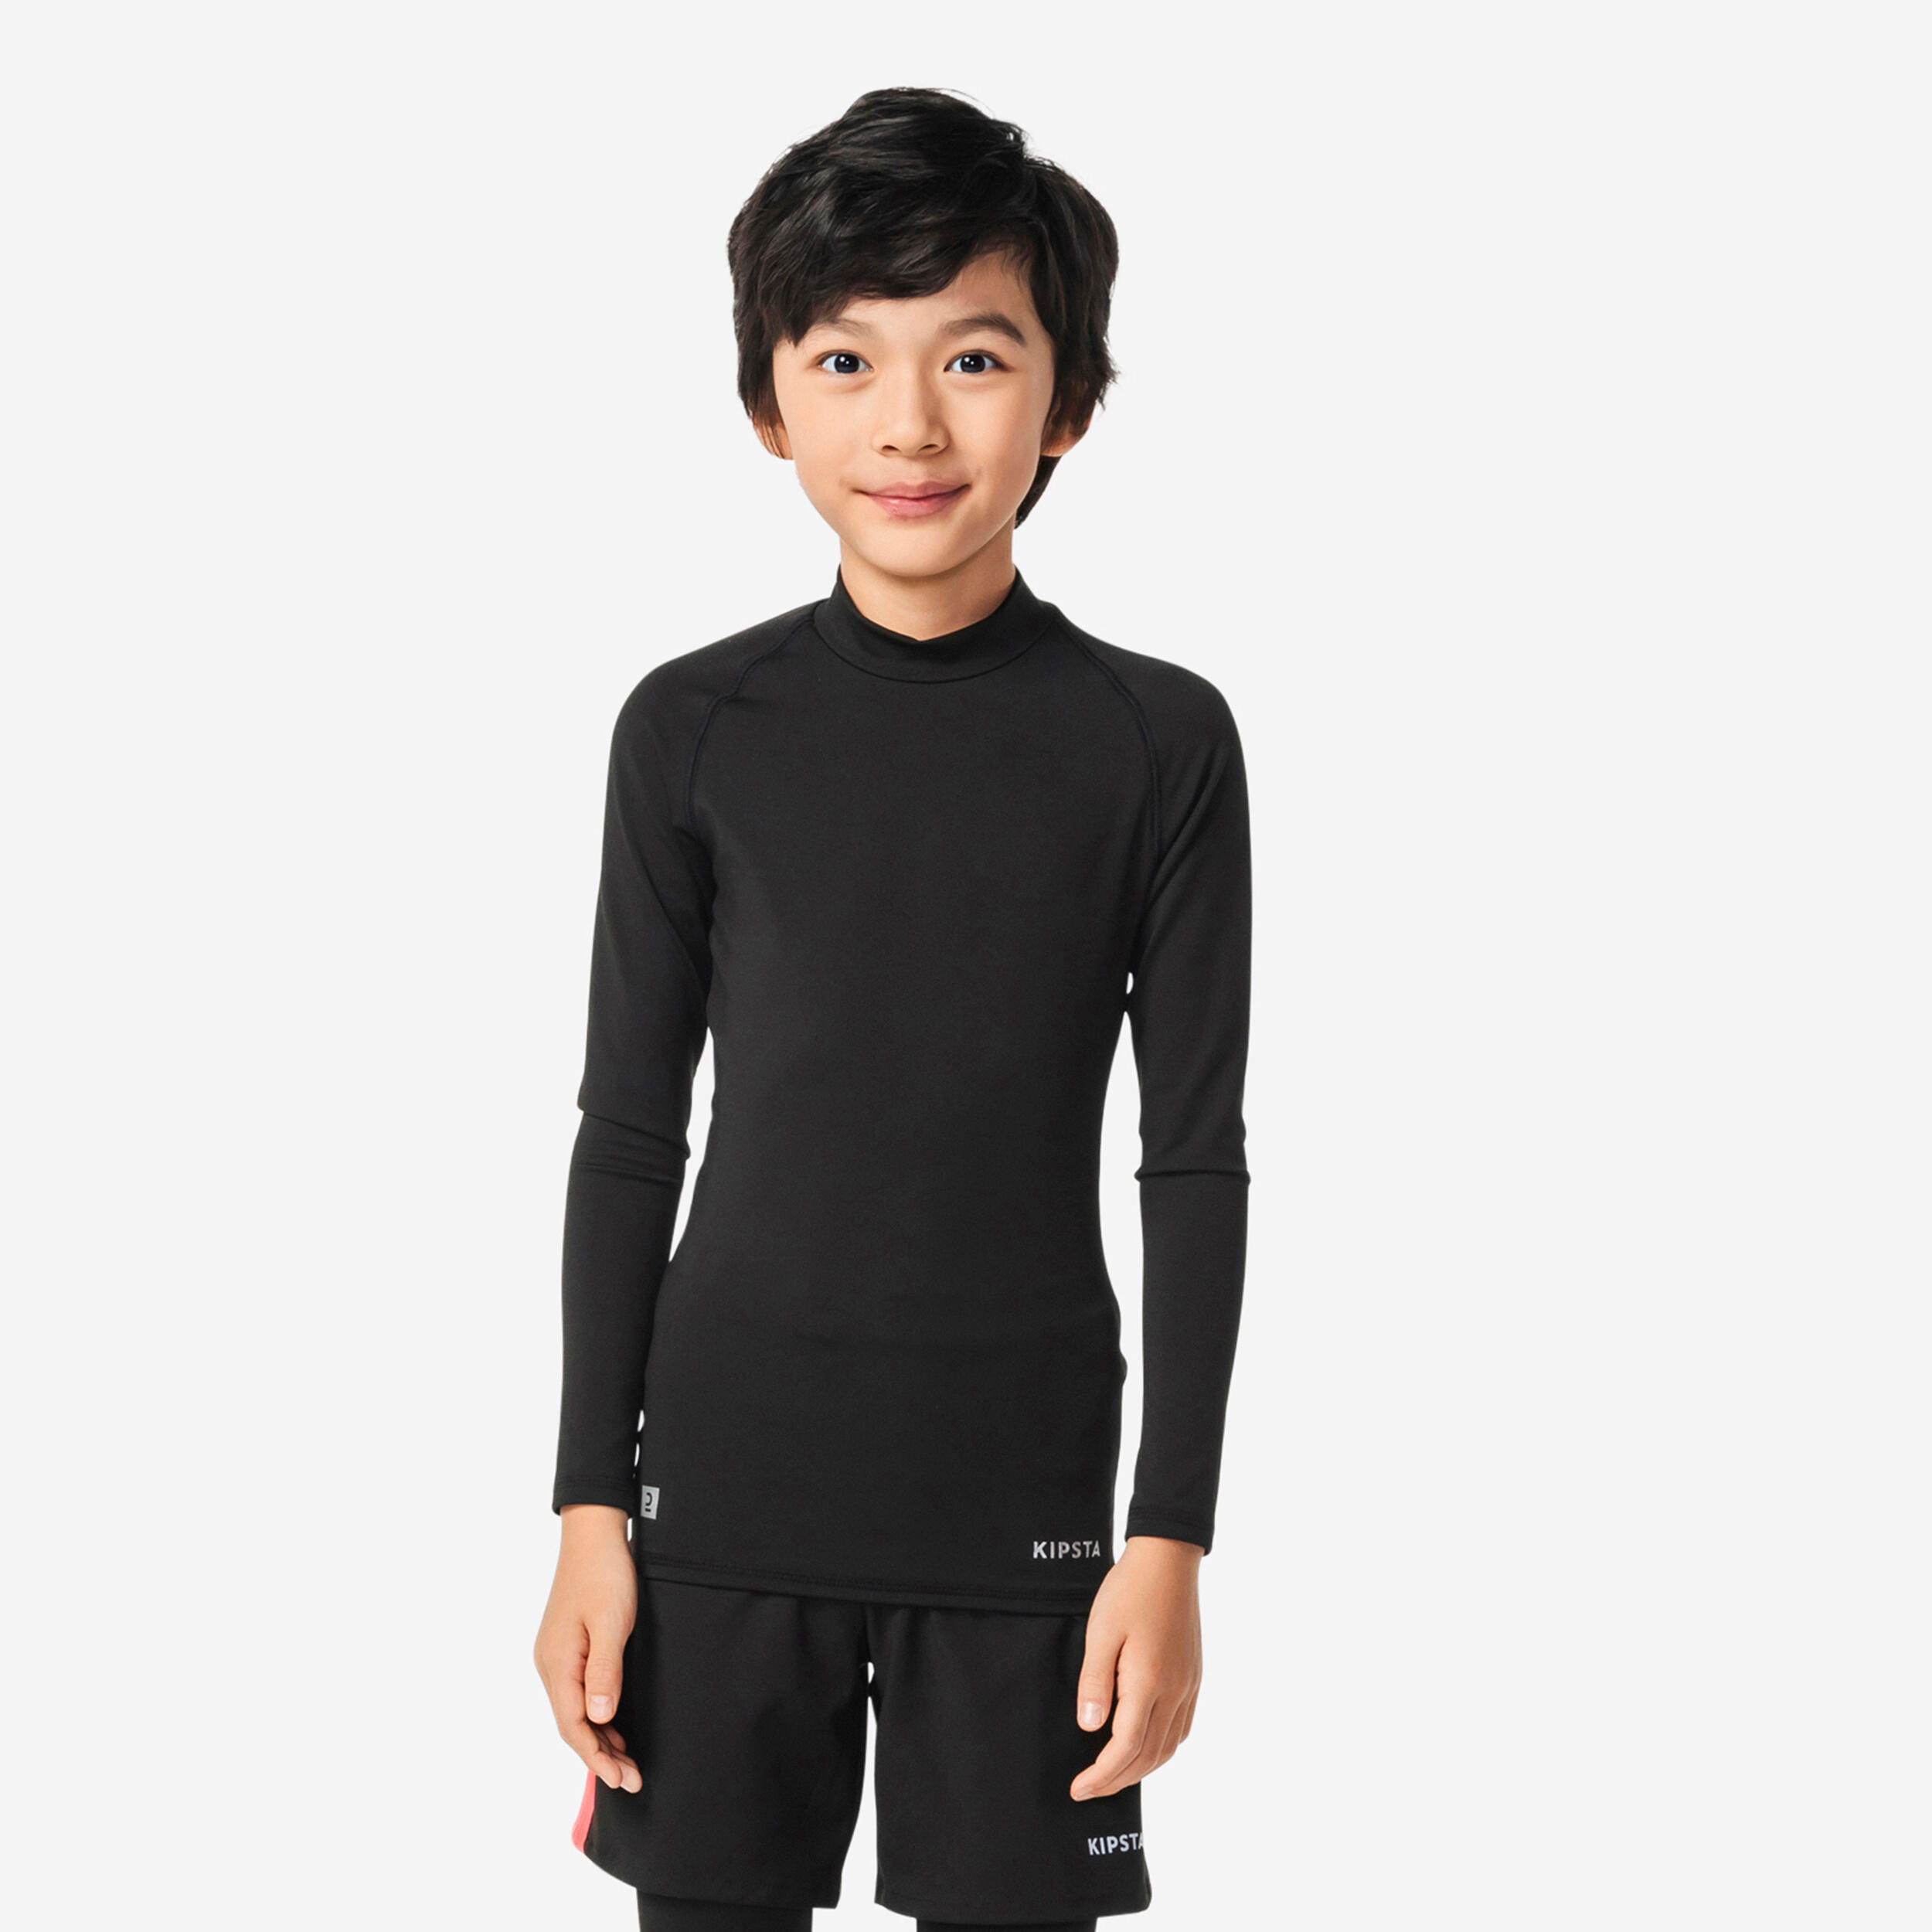 Thermal long sleeve - Thermal underwear - Body protection - Safety products